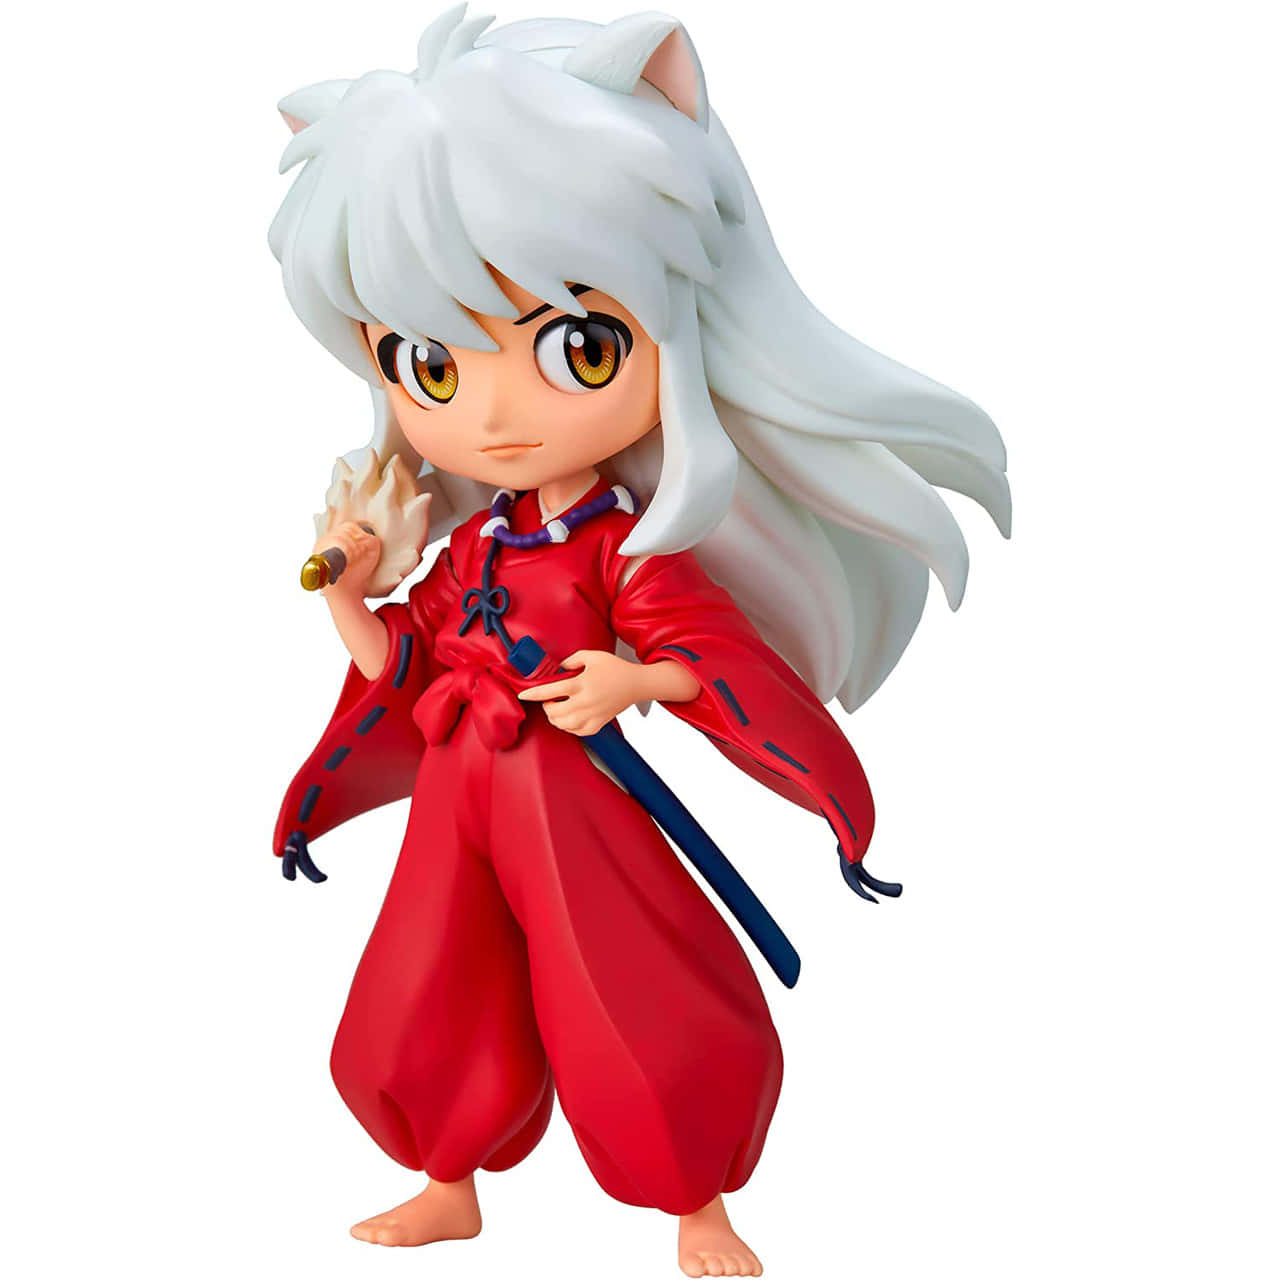 Inuyasha wielding the powerful Tessaiga sword against a fiery background Wallpaper